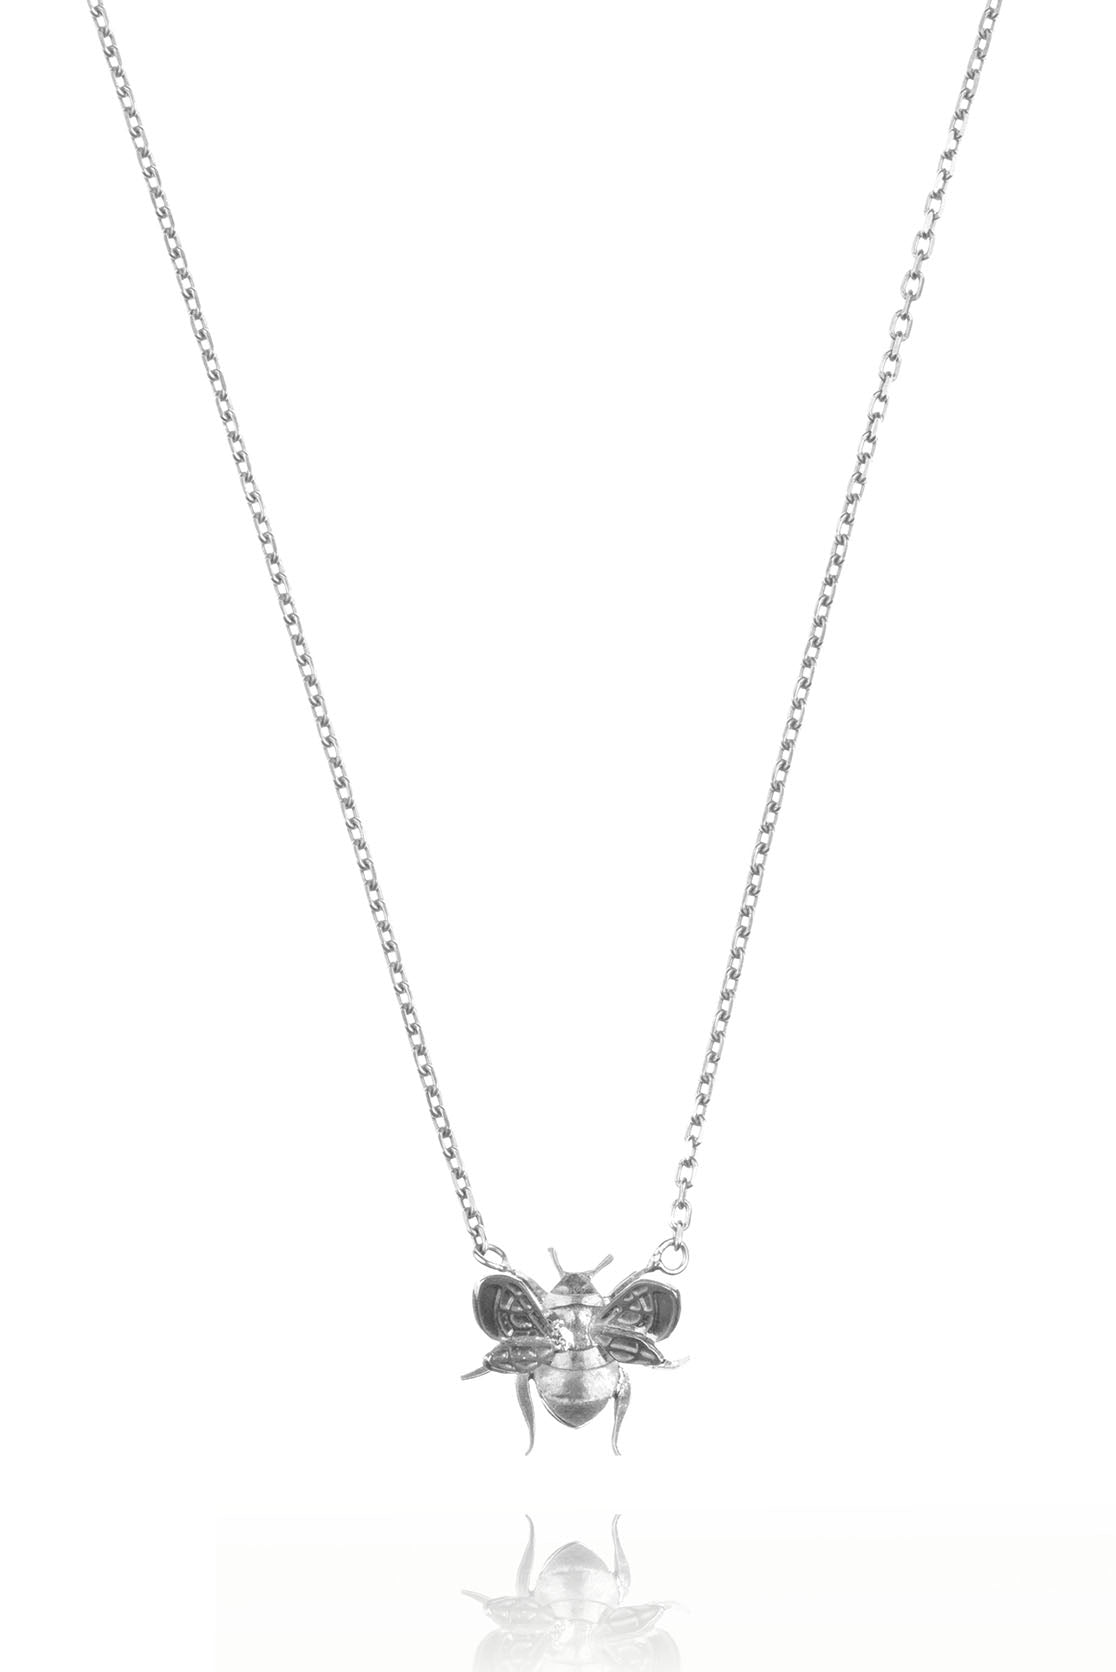 Bee Necklace in Sterling Silver or Gold